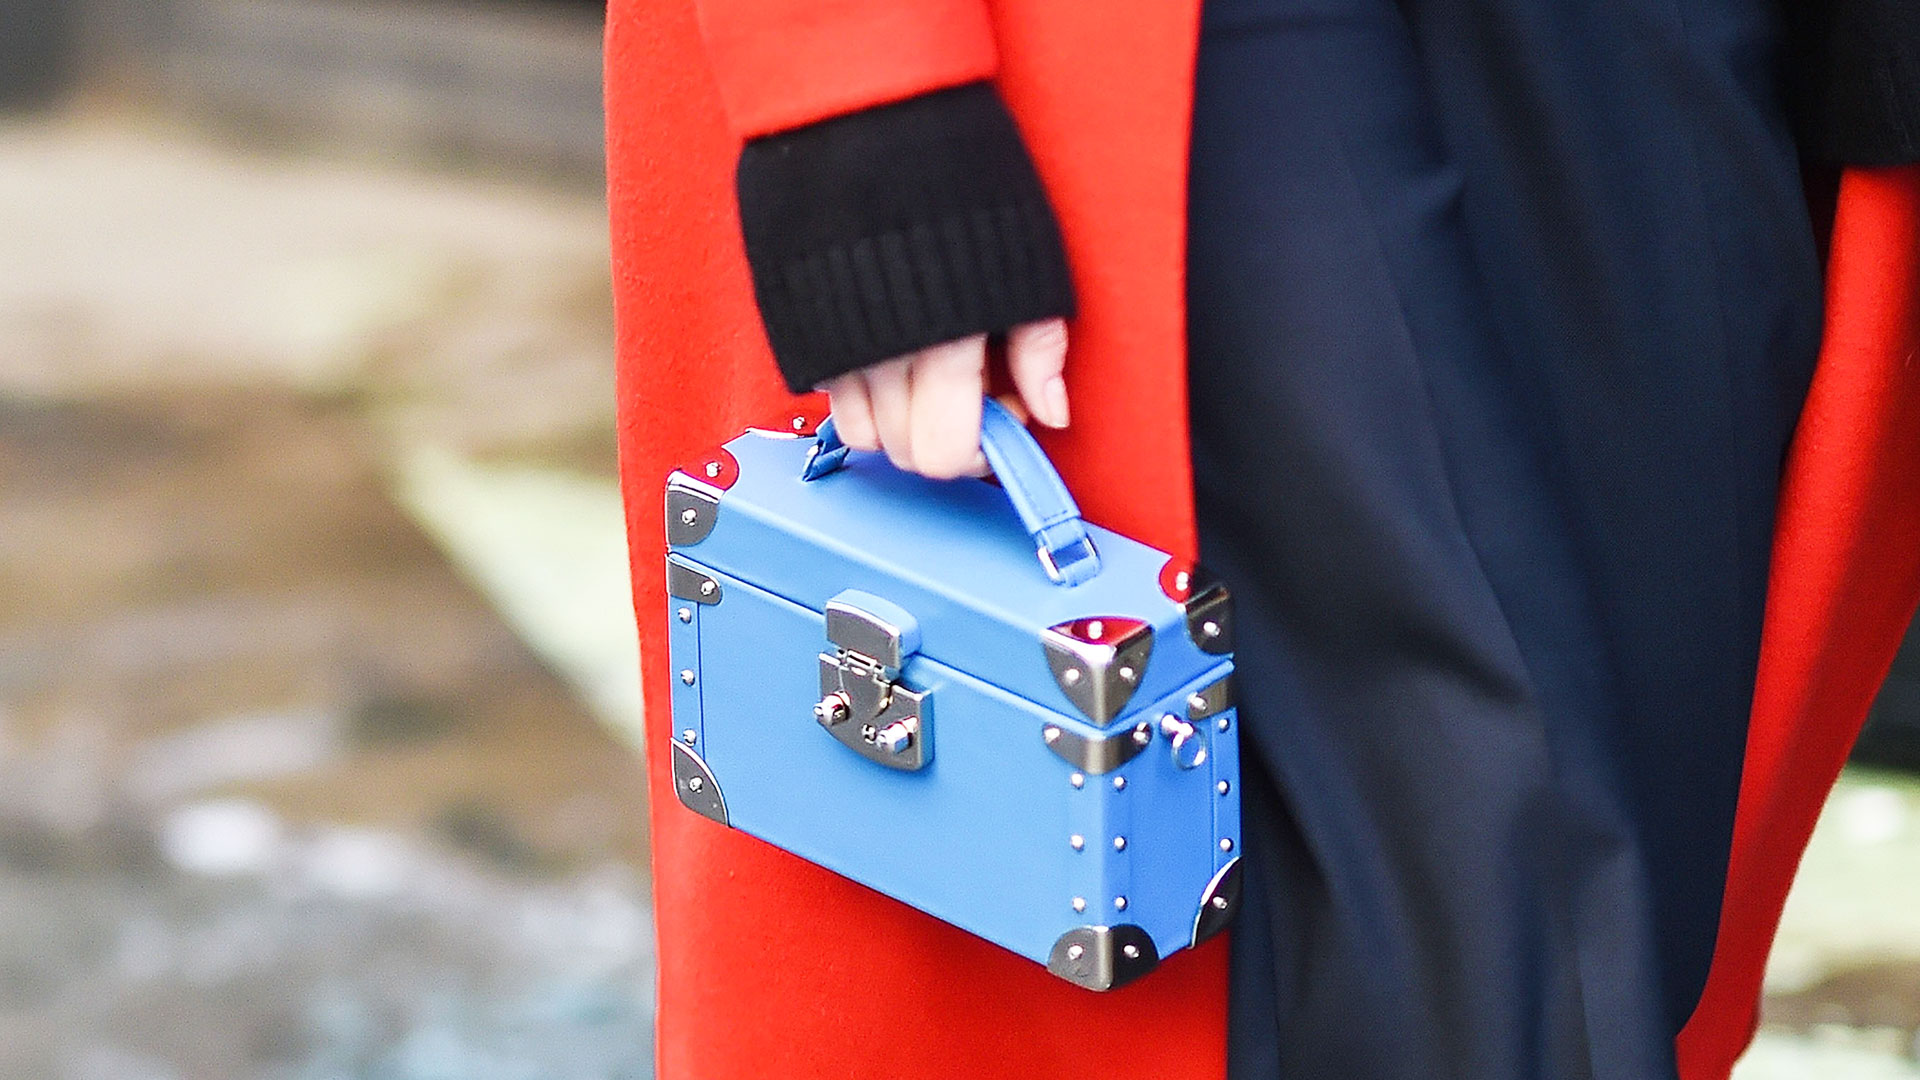 The Top 5 Handbag Trends to Get in on Right Now | StyleCaster